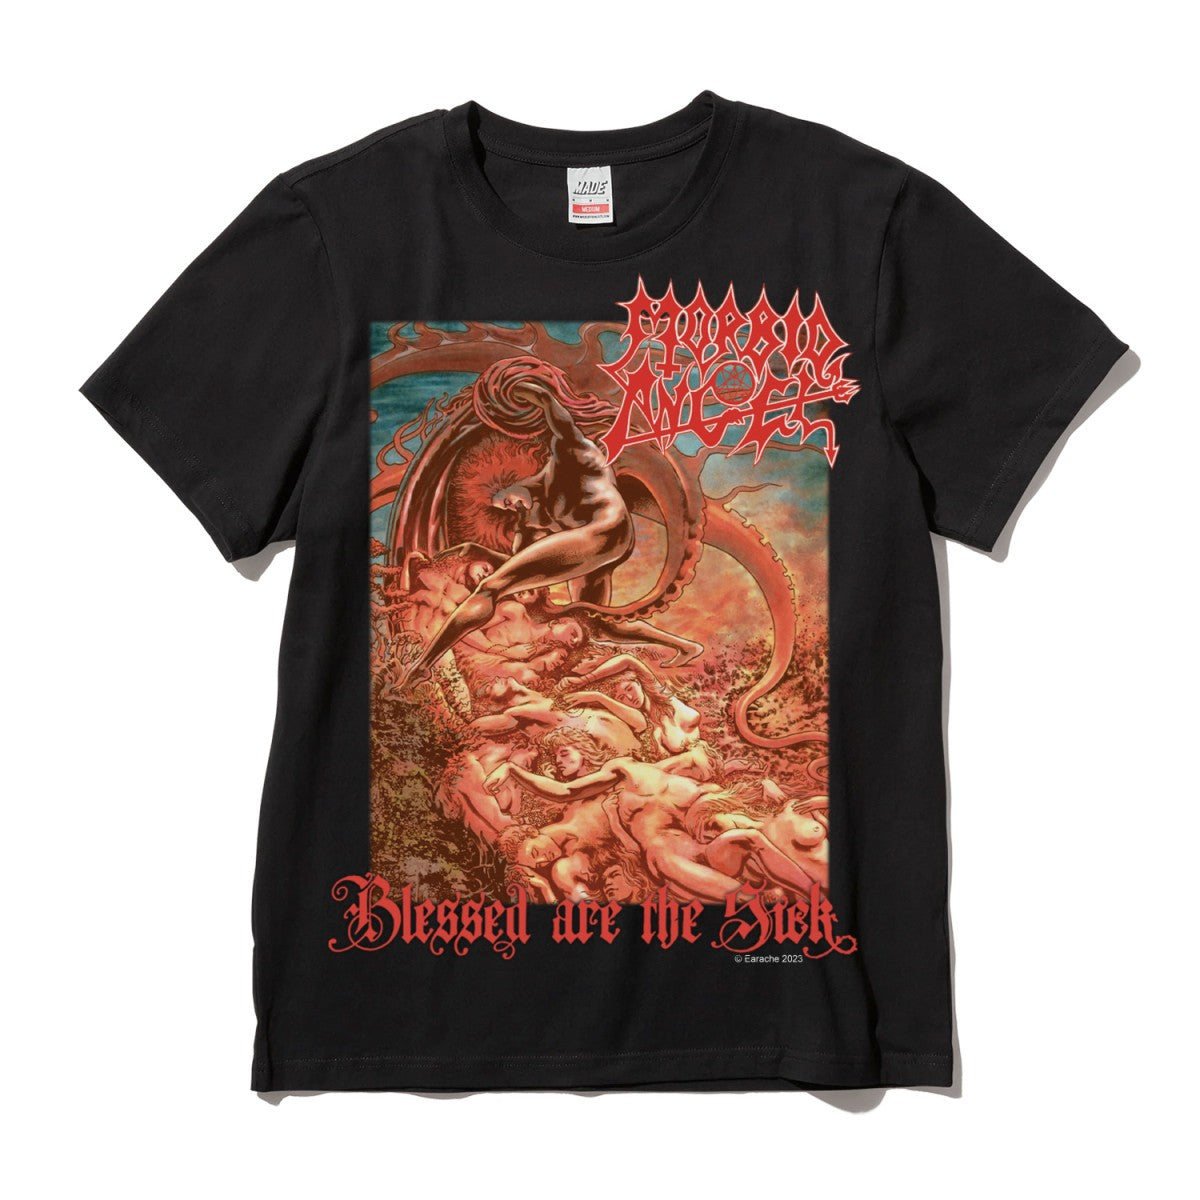 Morbid Angel "Blessed Are The Sick" Black T shirt